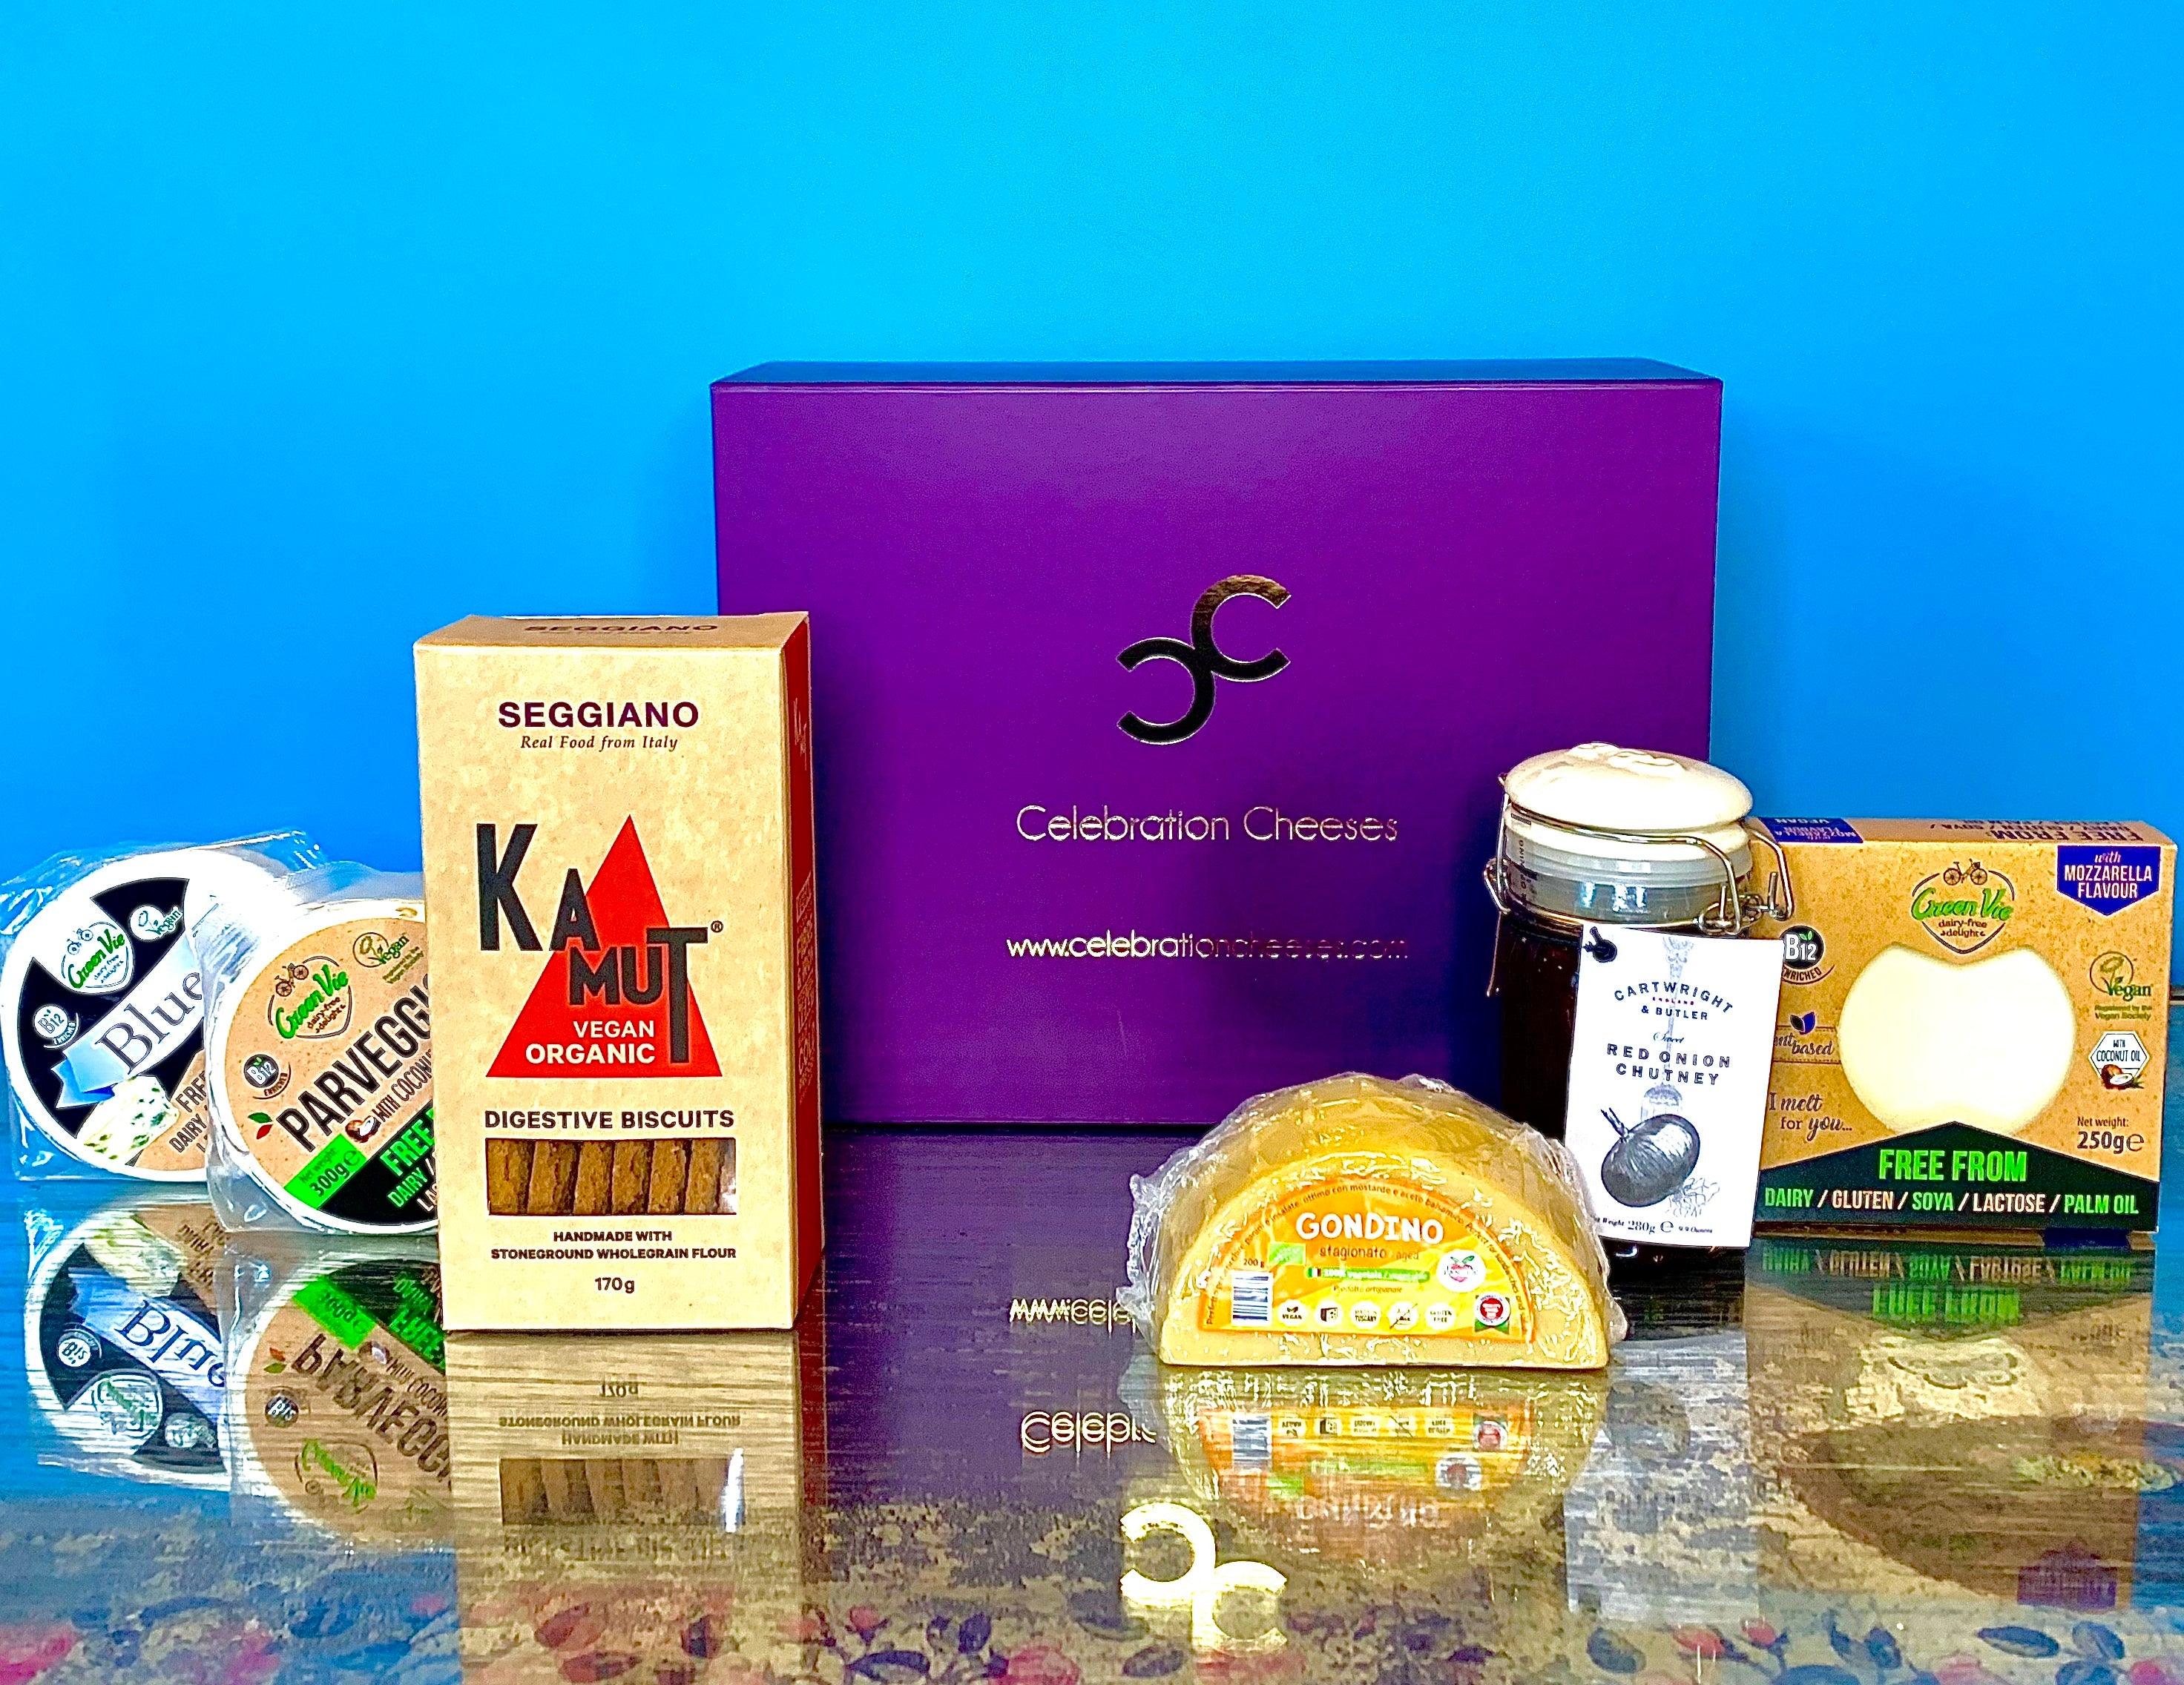 The "Surprise Four You" Vegan Cheese Gift Box 800g (approx cheese weight) - Celebration Cheeses